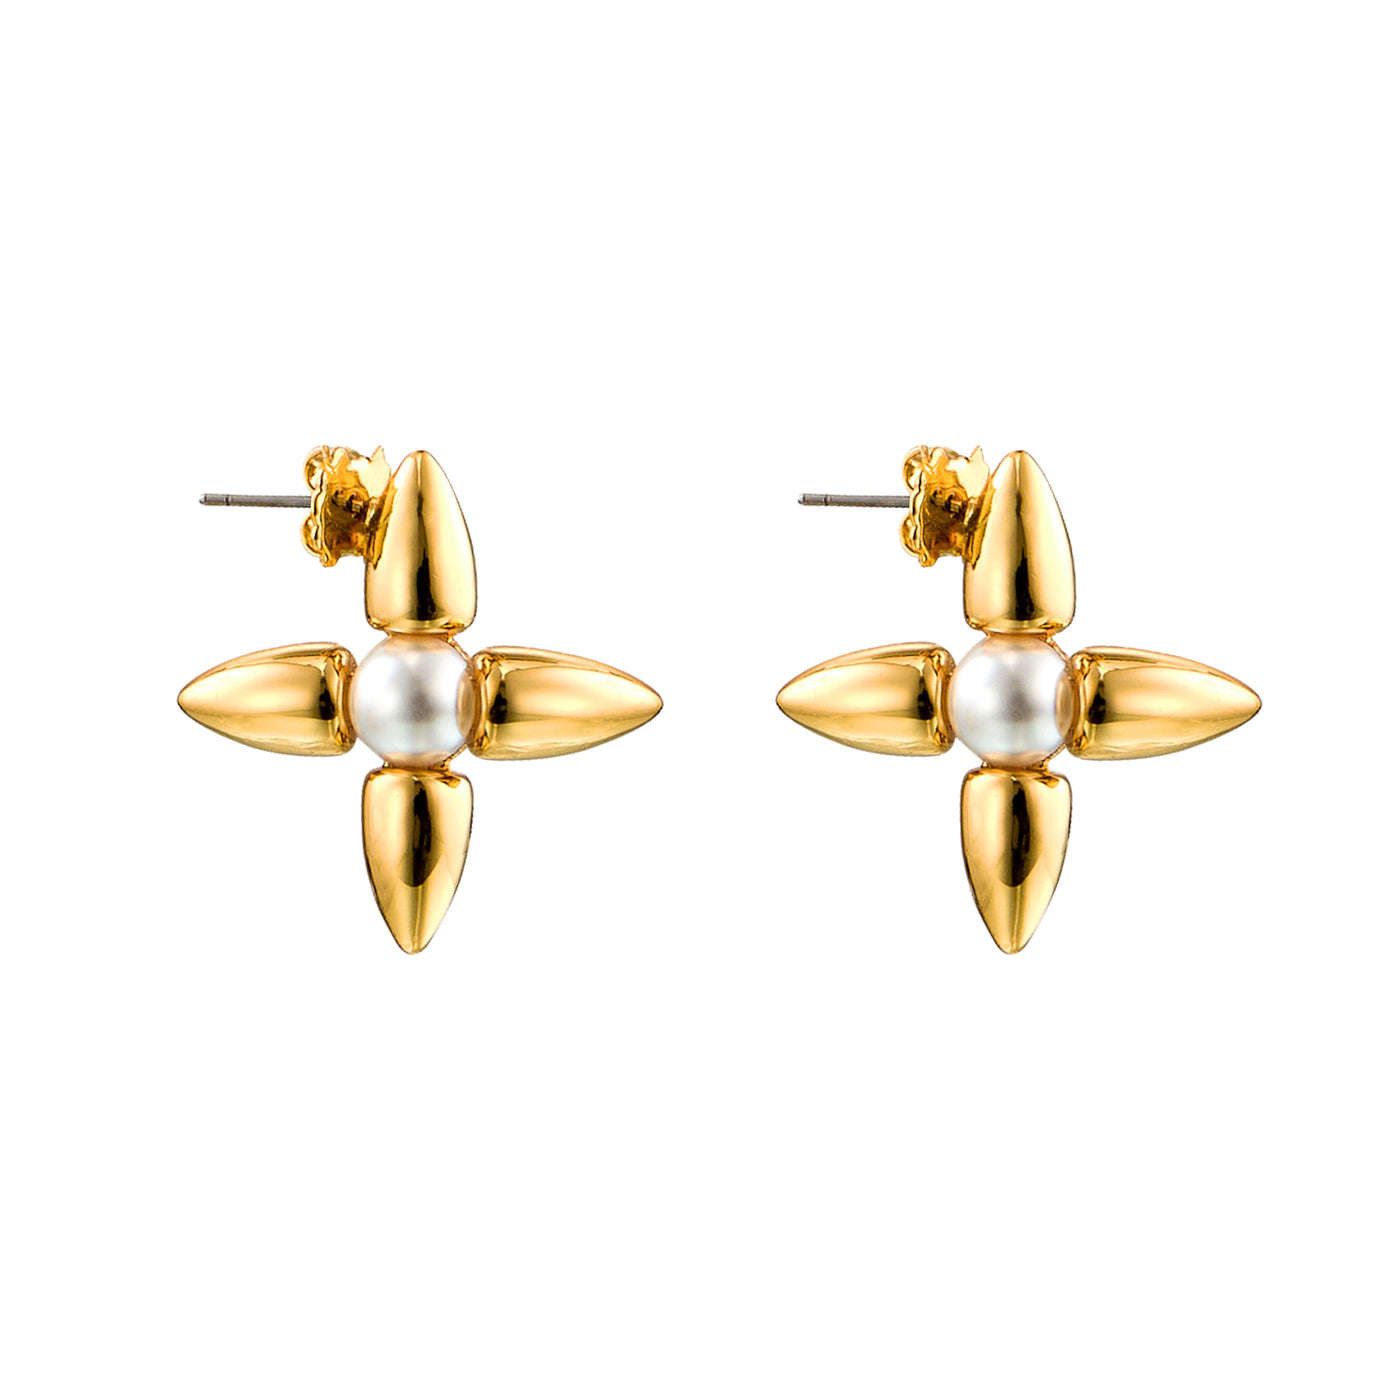 Marseille Stud Earrings, 18KT Gold Plated